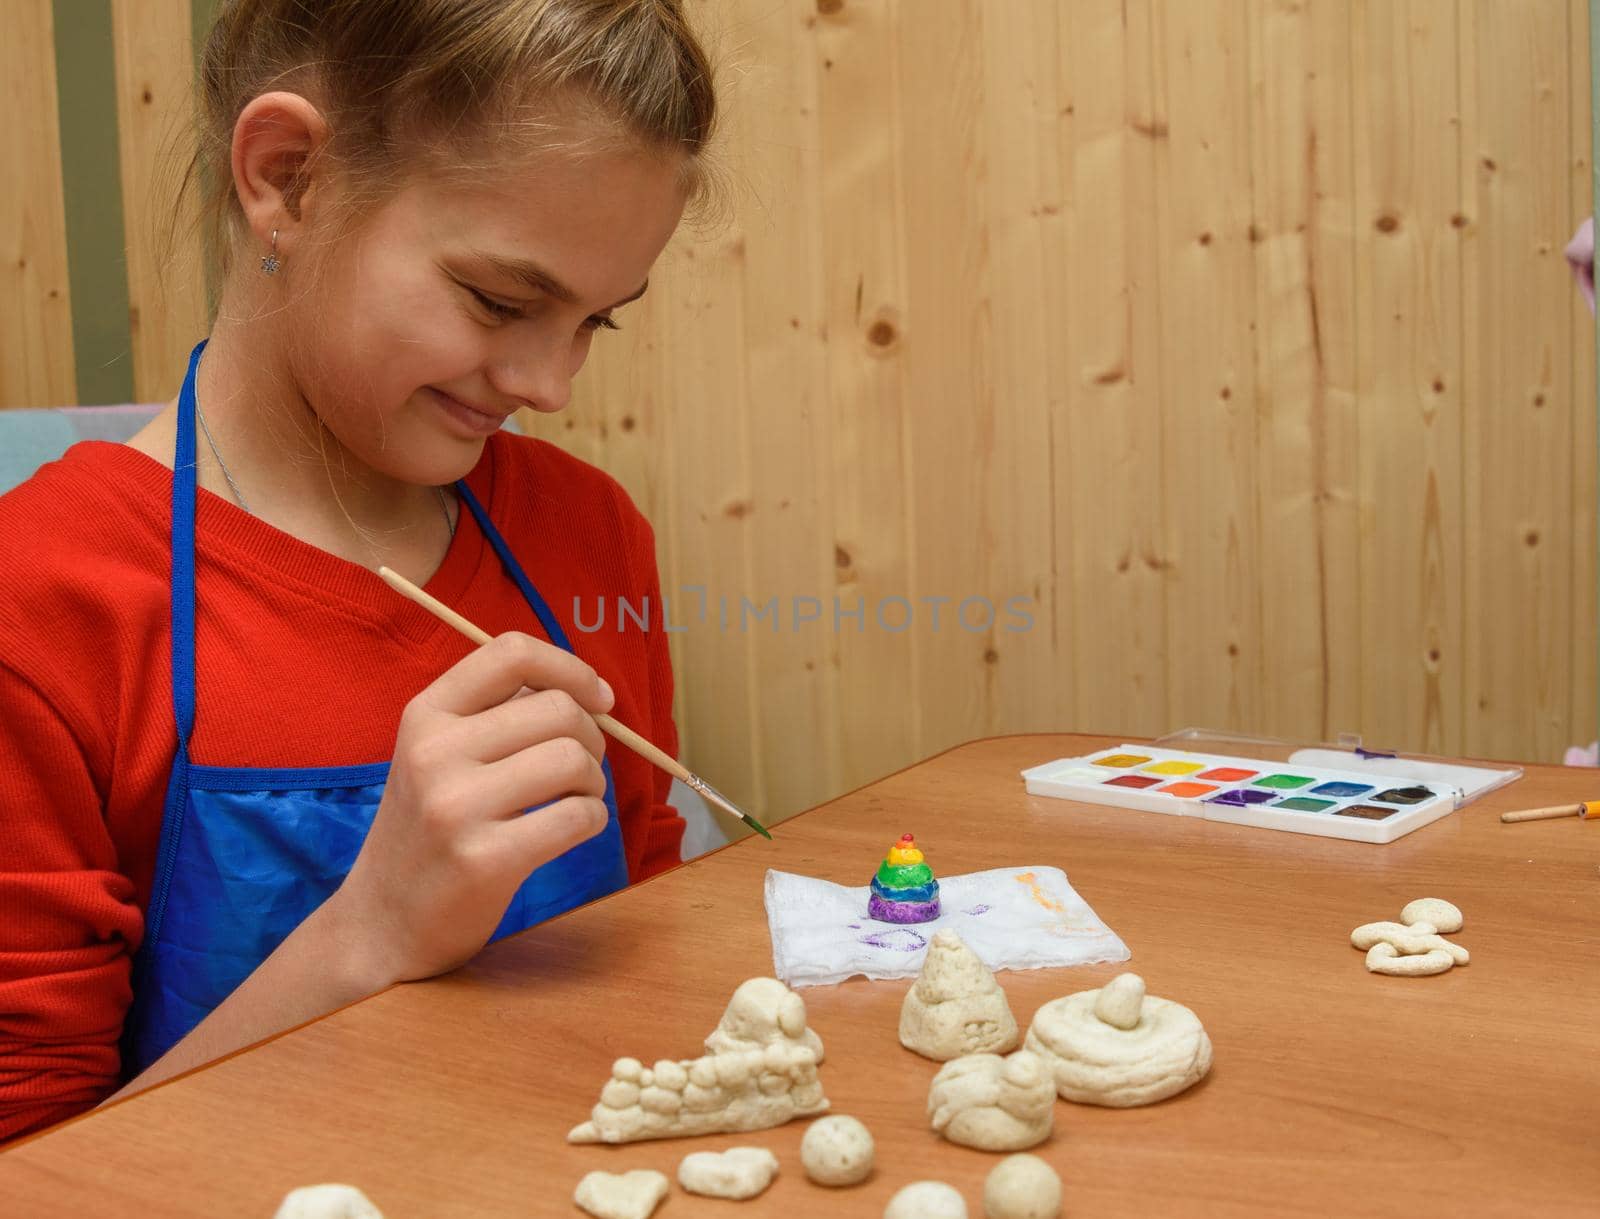 Girl rejoices at the finished painted figurine made of salt dough